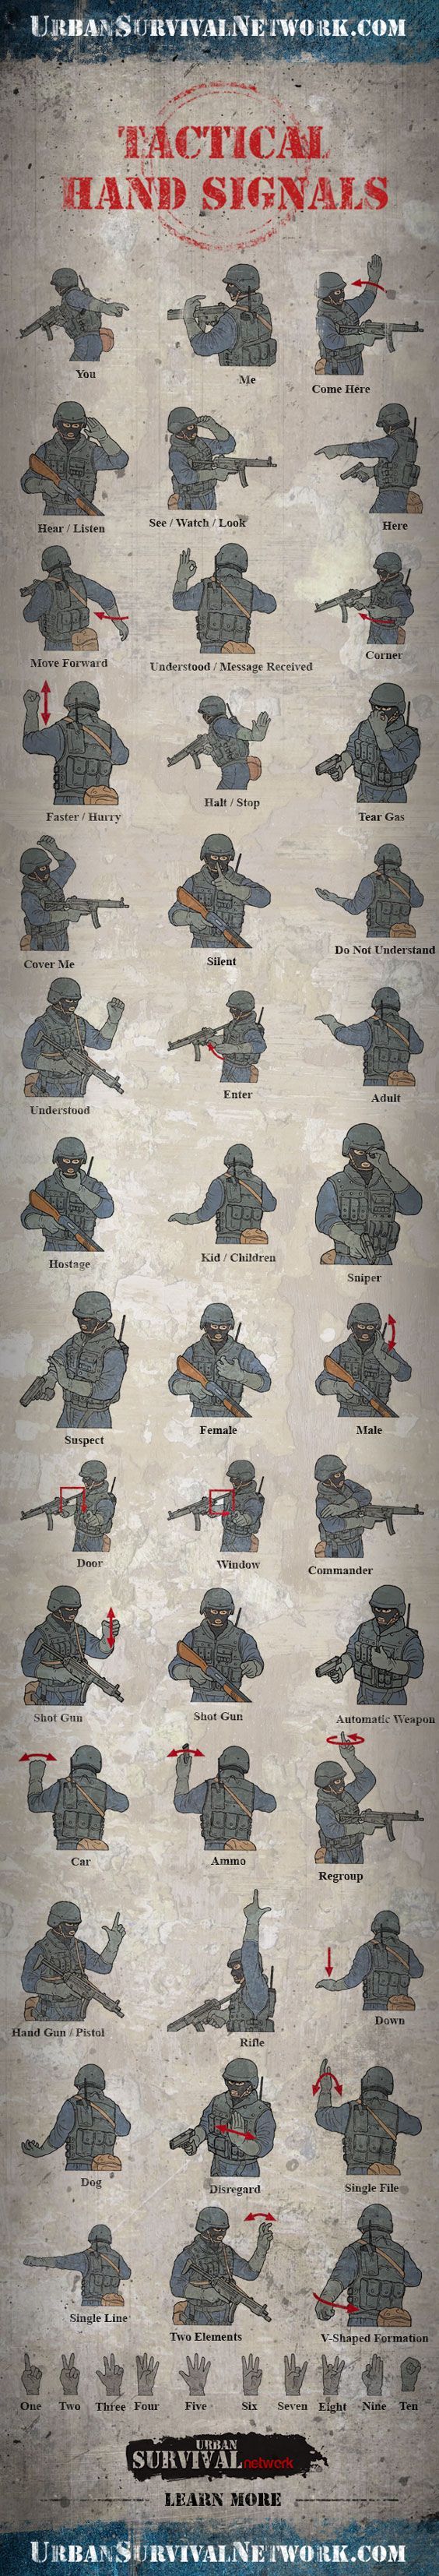 Tactical Hand Signals – preparation for the Zombie appocalypse